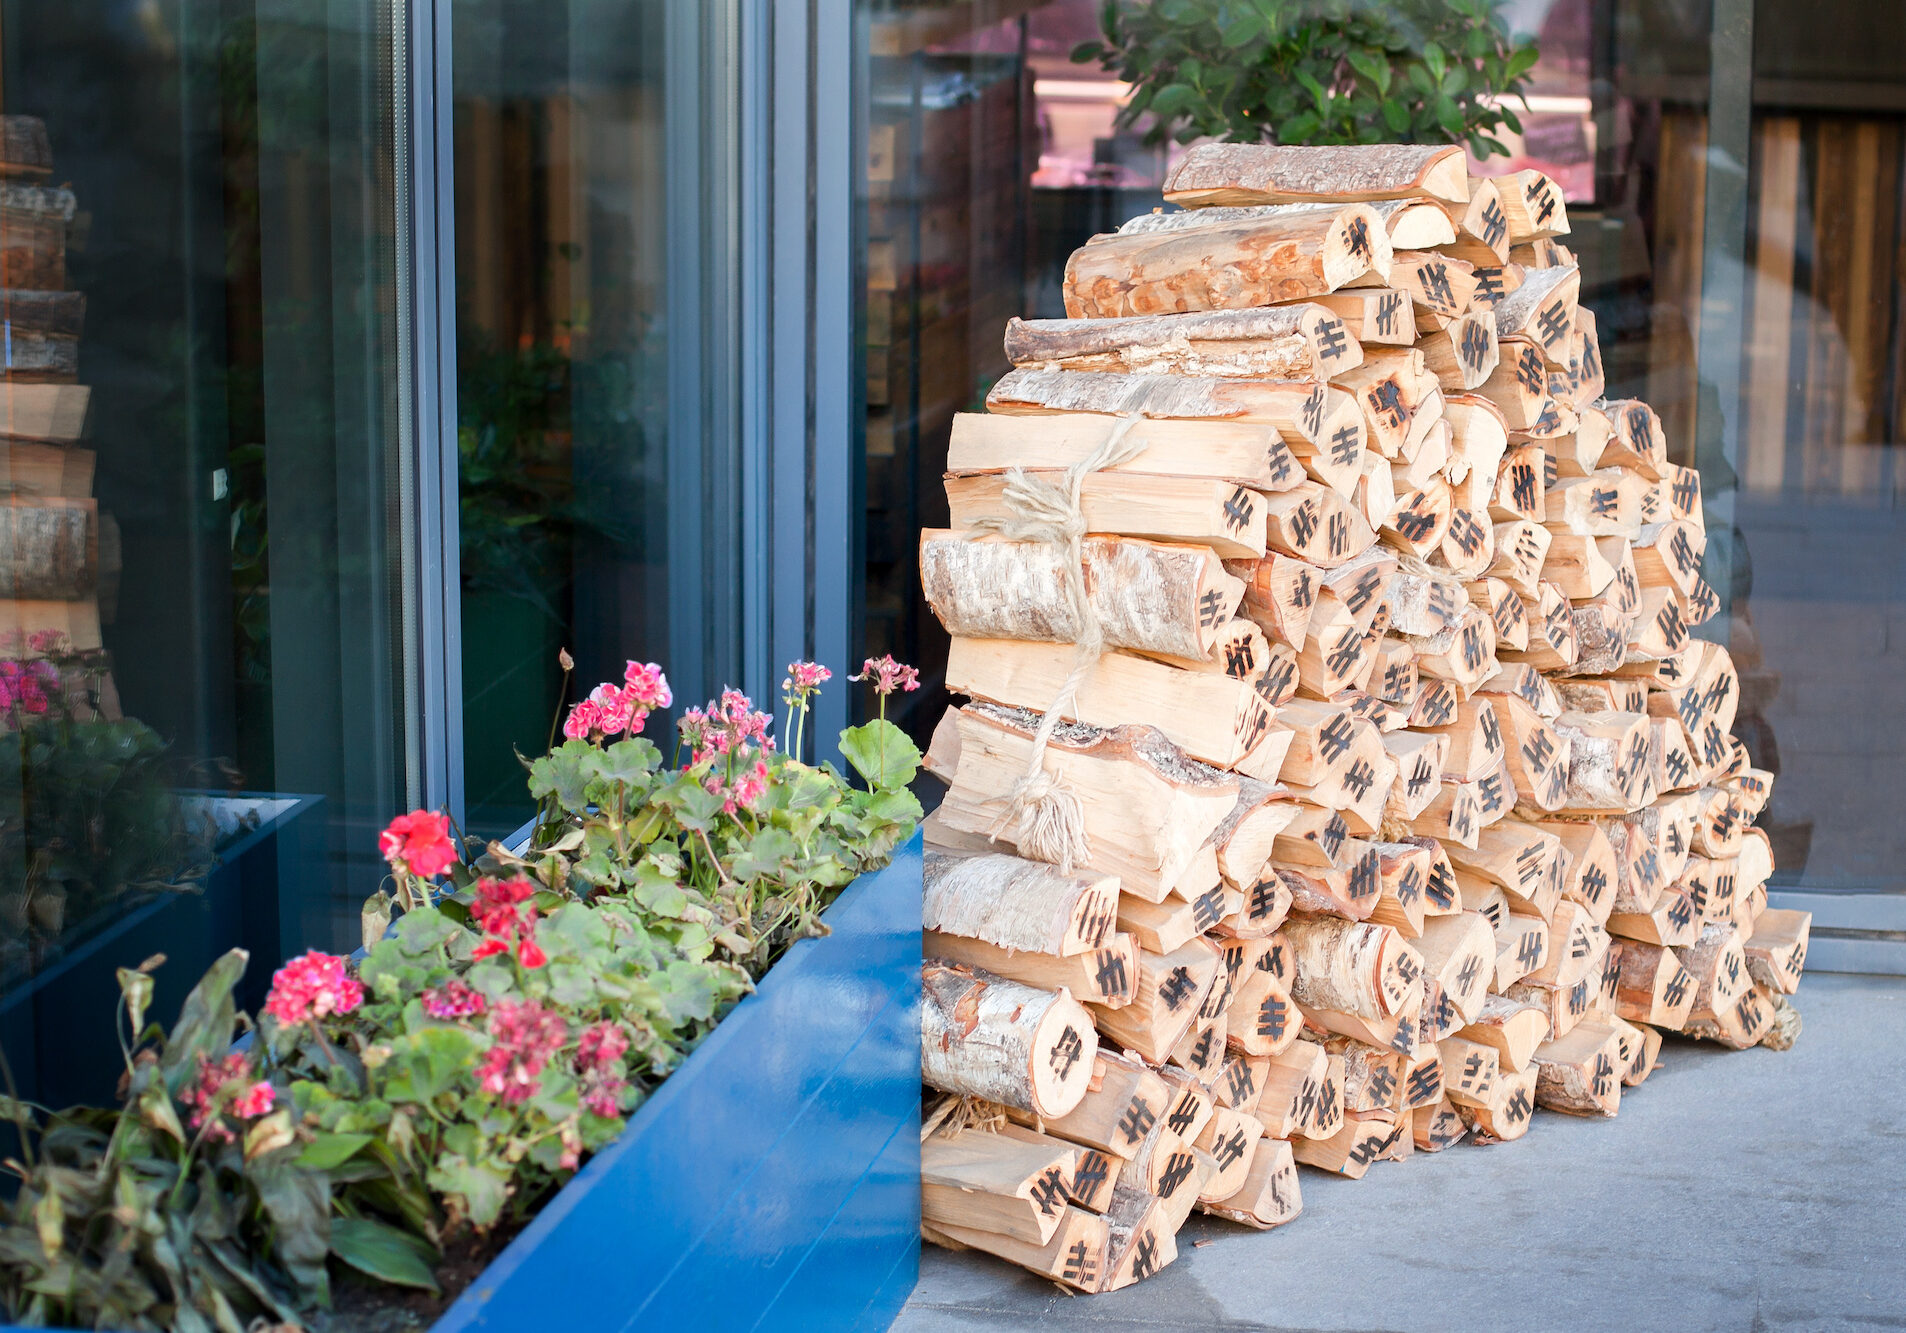 Pile of birch firewood neatly stacked near the building next to the flower bed